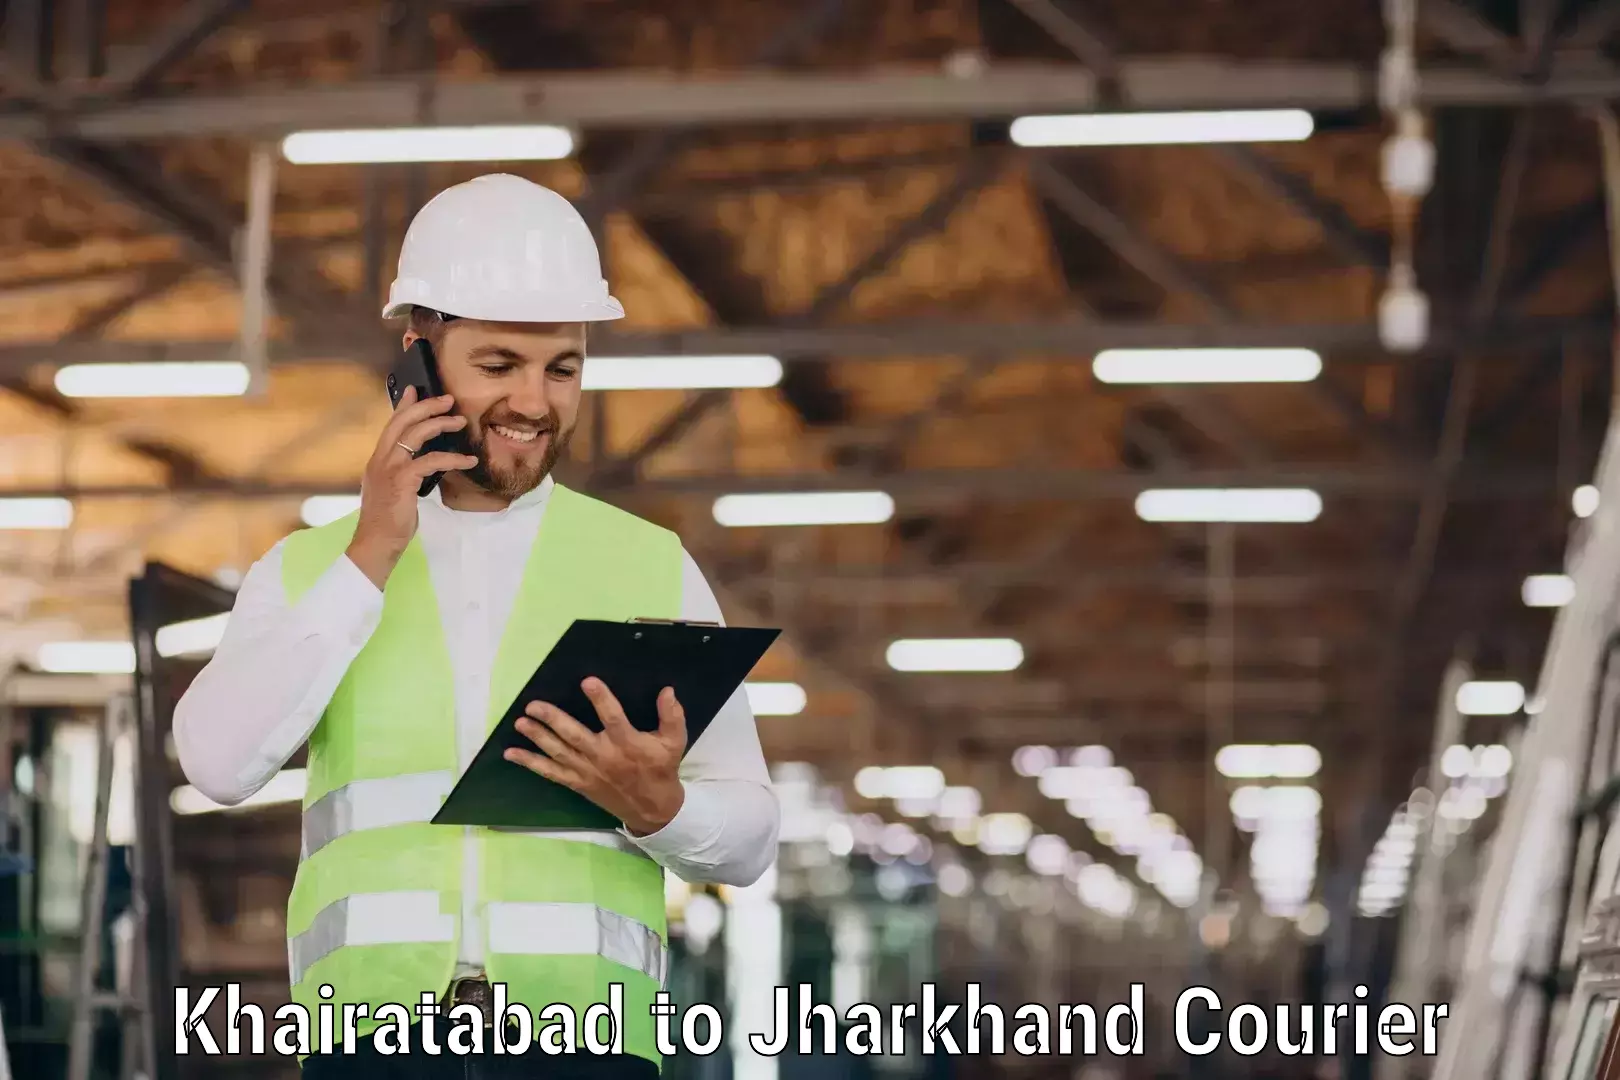 Global courier networks Khairatabad to Bokaro